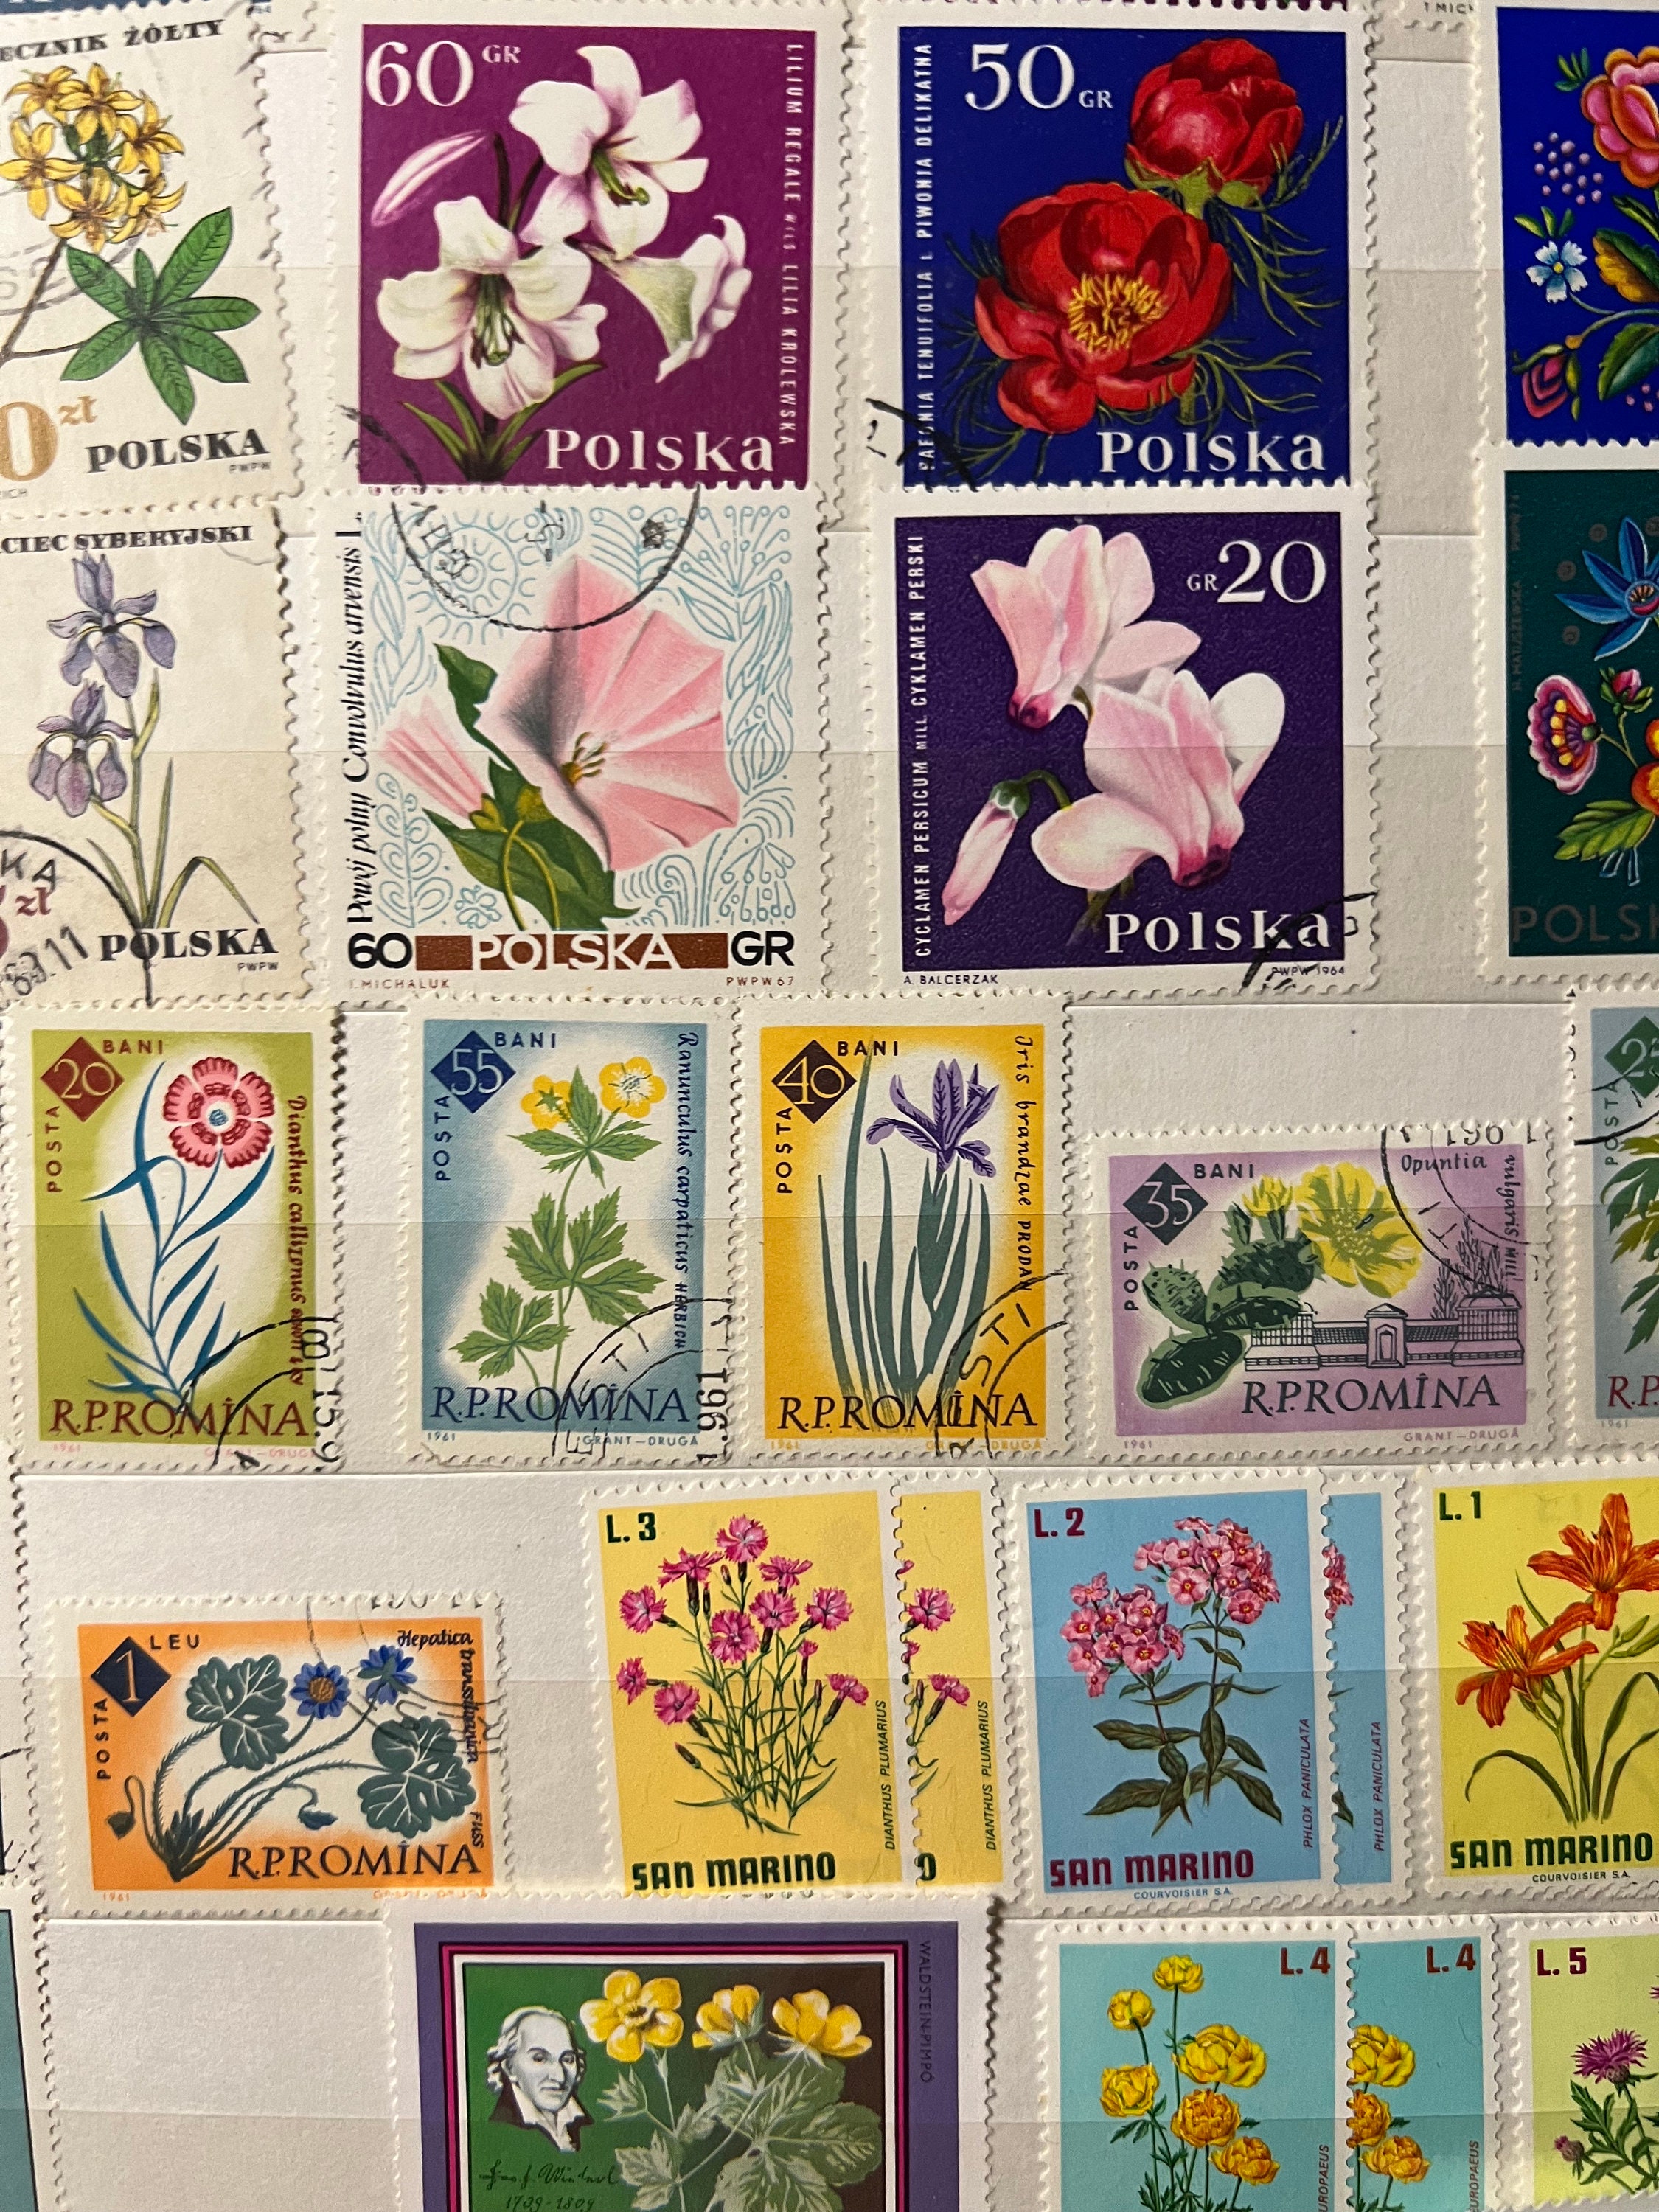 Tulips on Postage Stamps, Colourful Flower Stamps, floral postal stamp  card toppers for craft